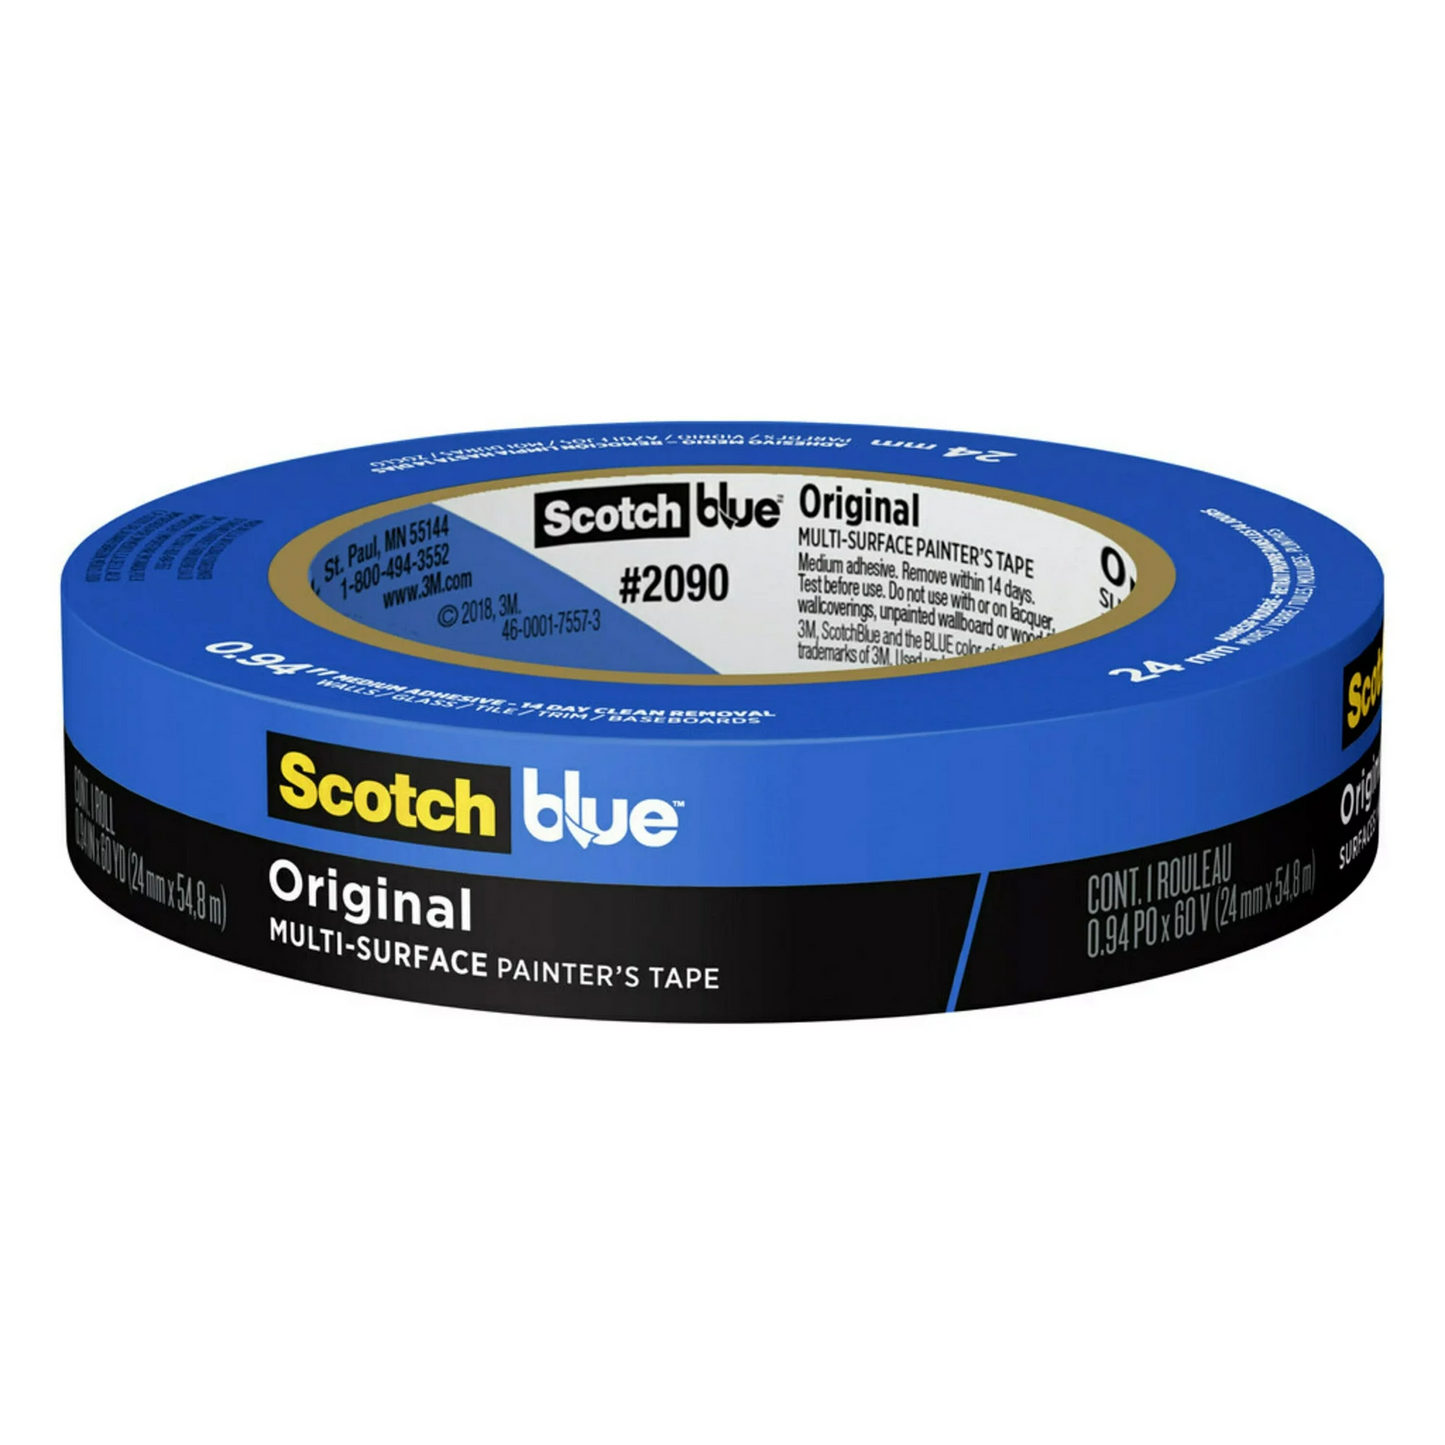 ScotchBlue Original Multi-Surface Painters Tape, Blue, 0.94 inches x 60 yards, 1 Roll